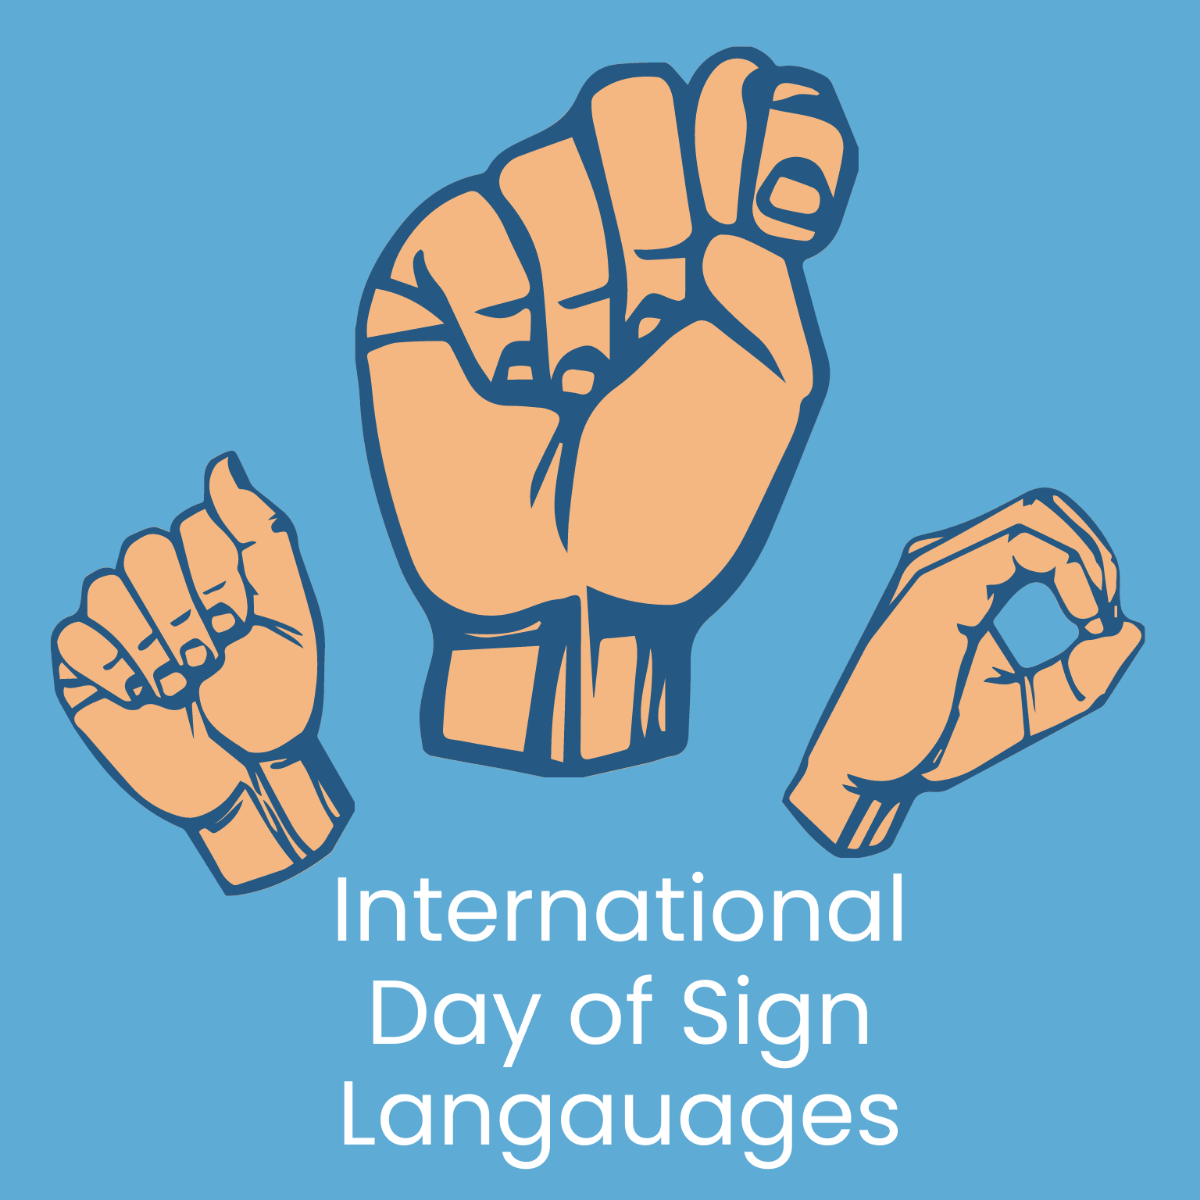 International Day of Sign Languages Illustration Template